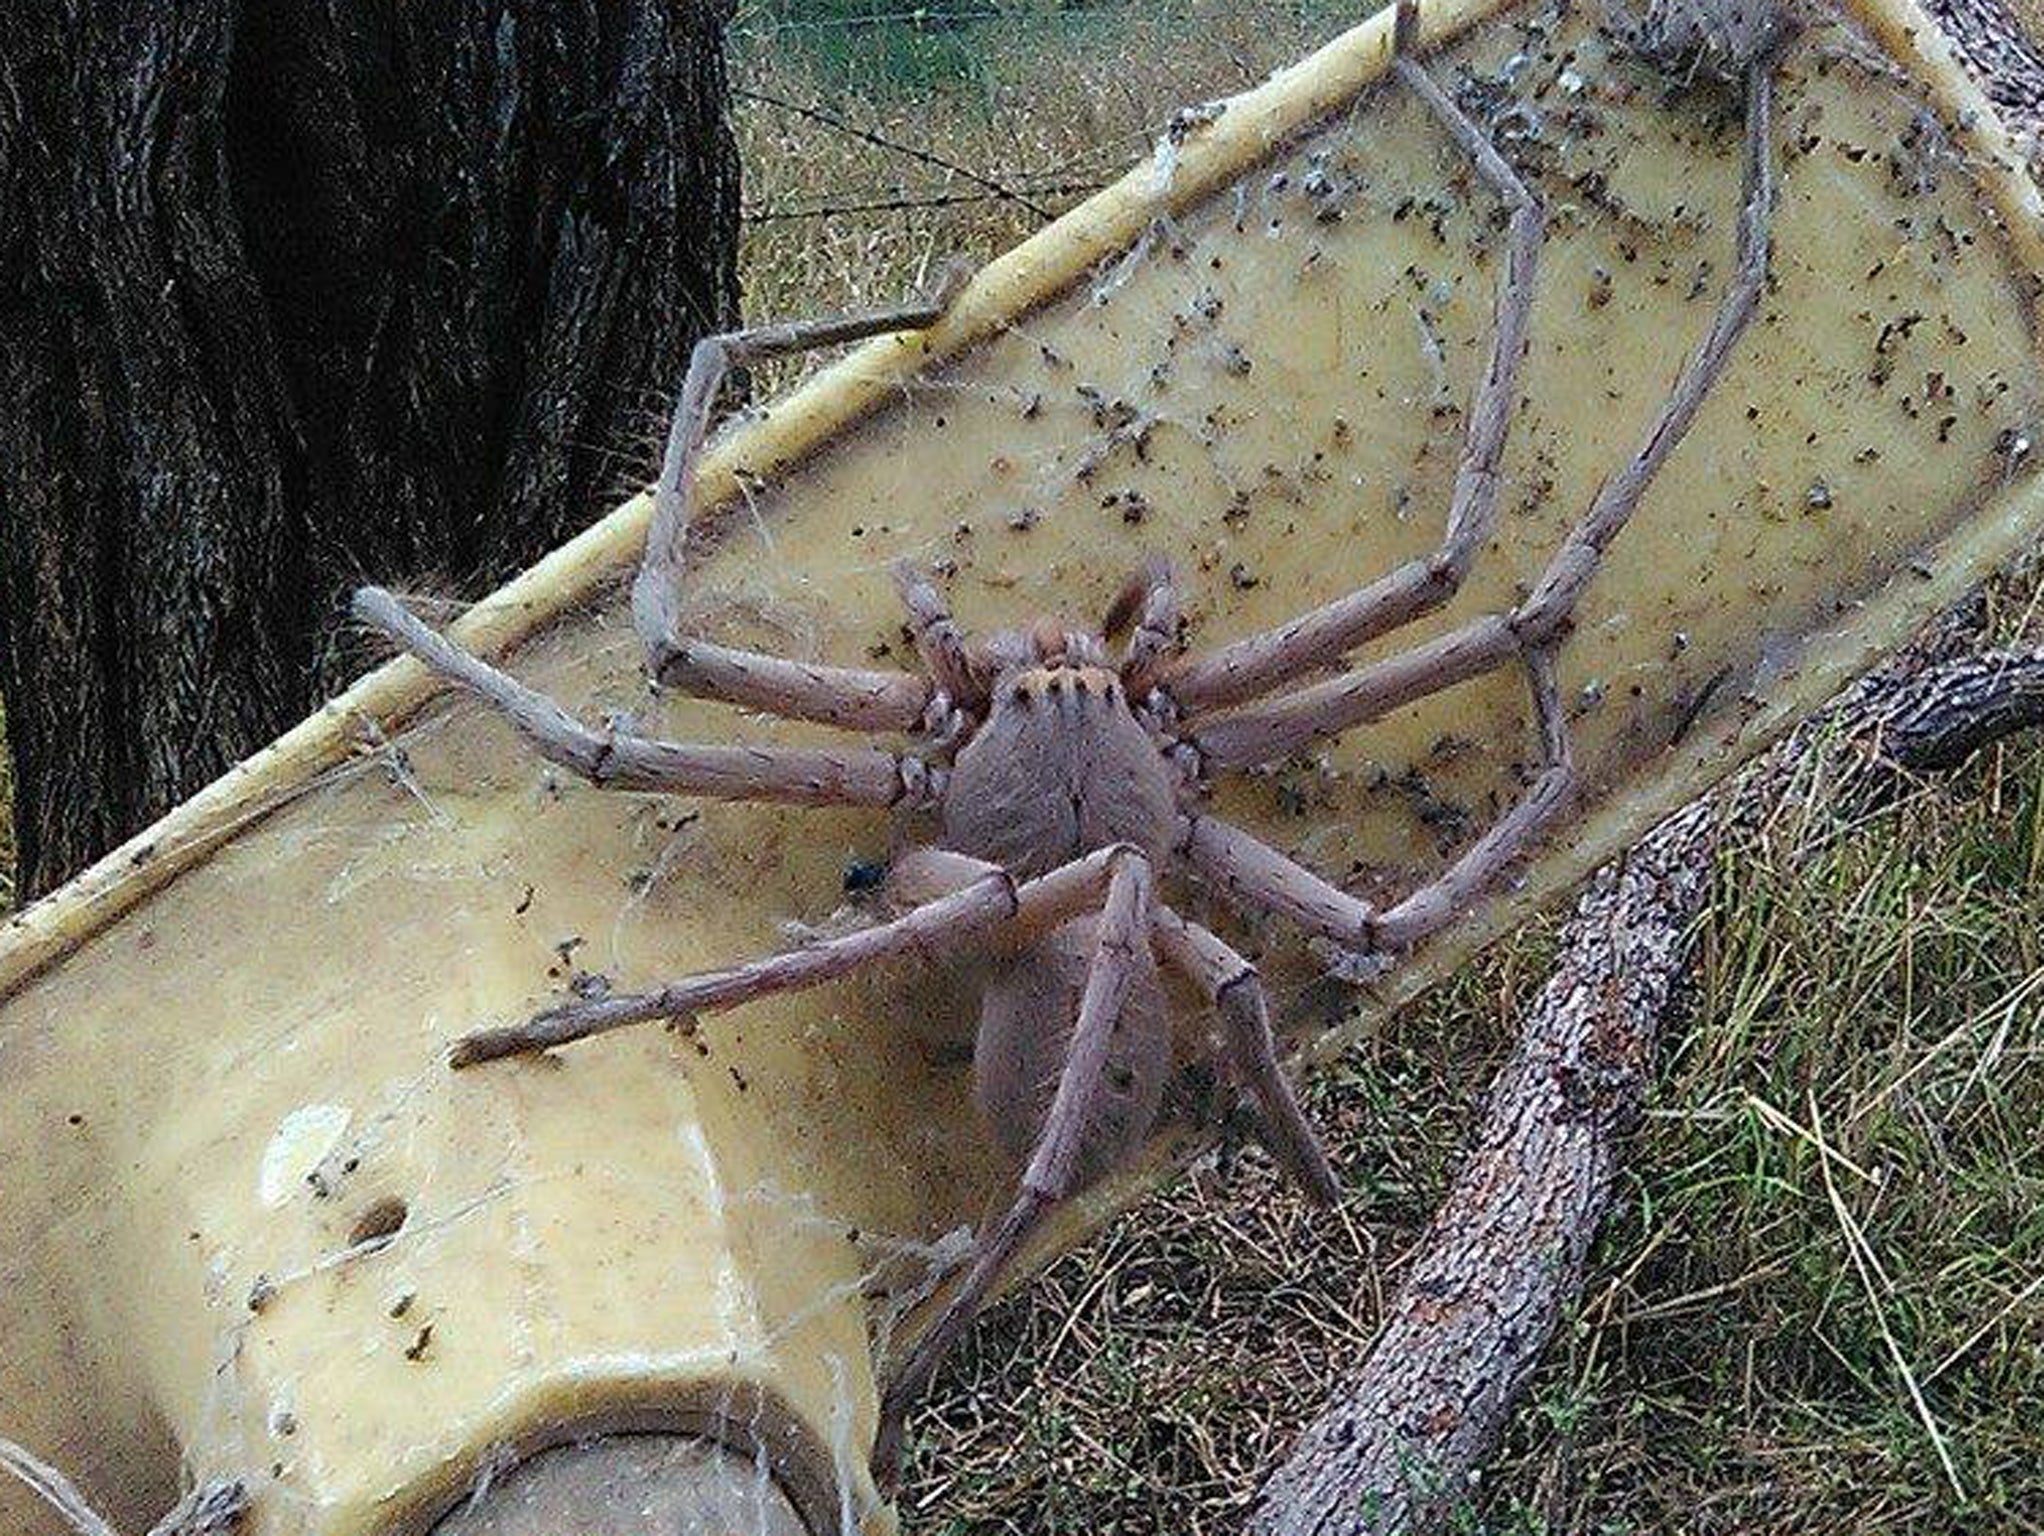 A huntsman spider in Queensland, Australia. The spider's leg span can reach up to 5.9 inches.